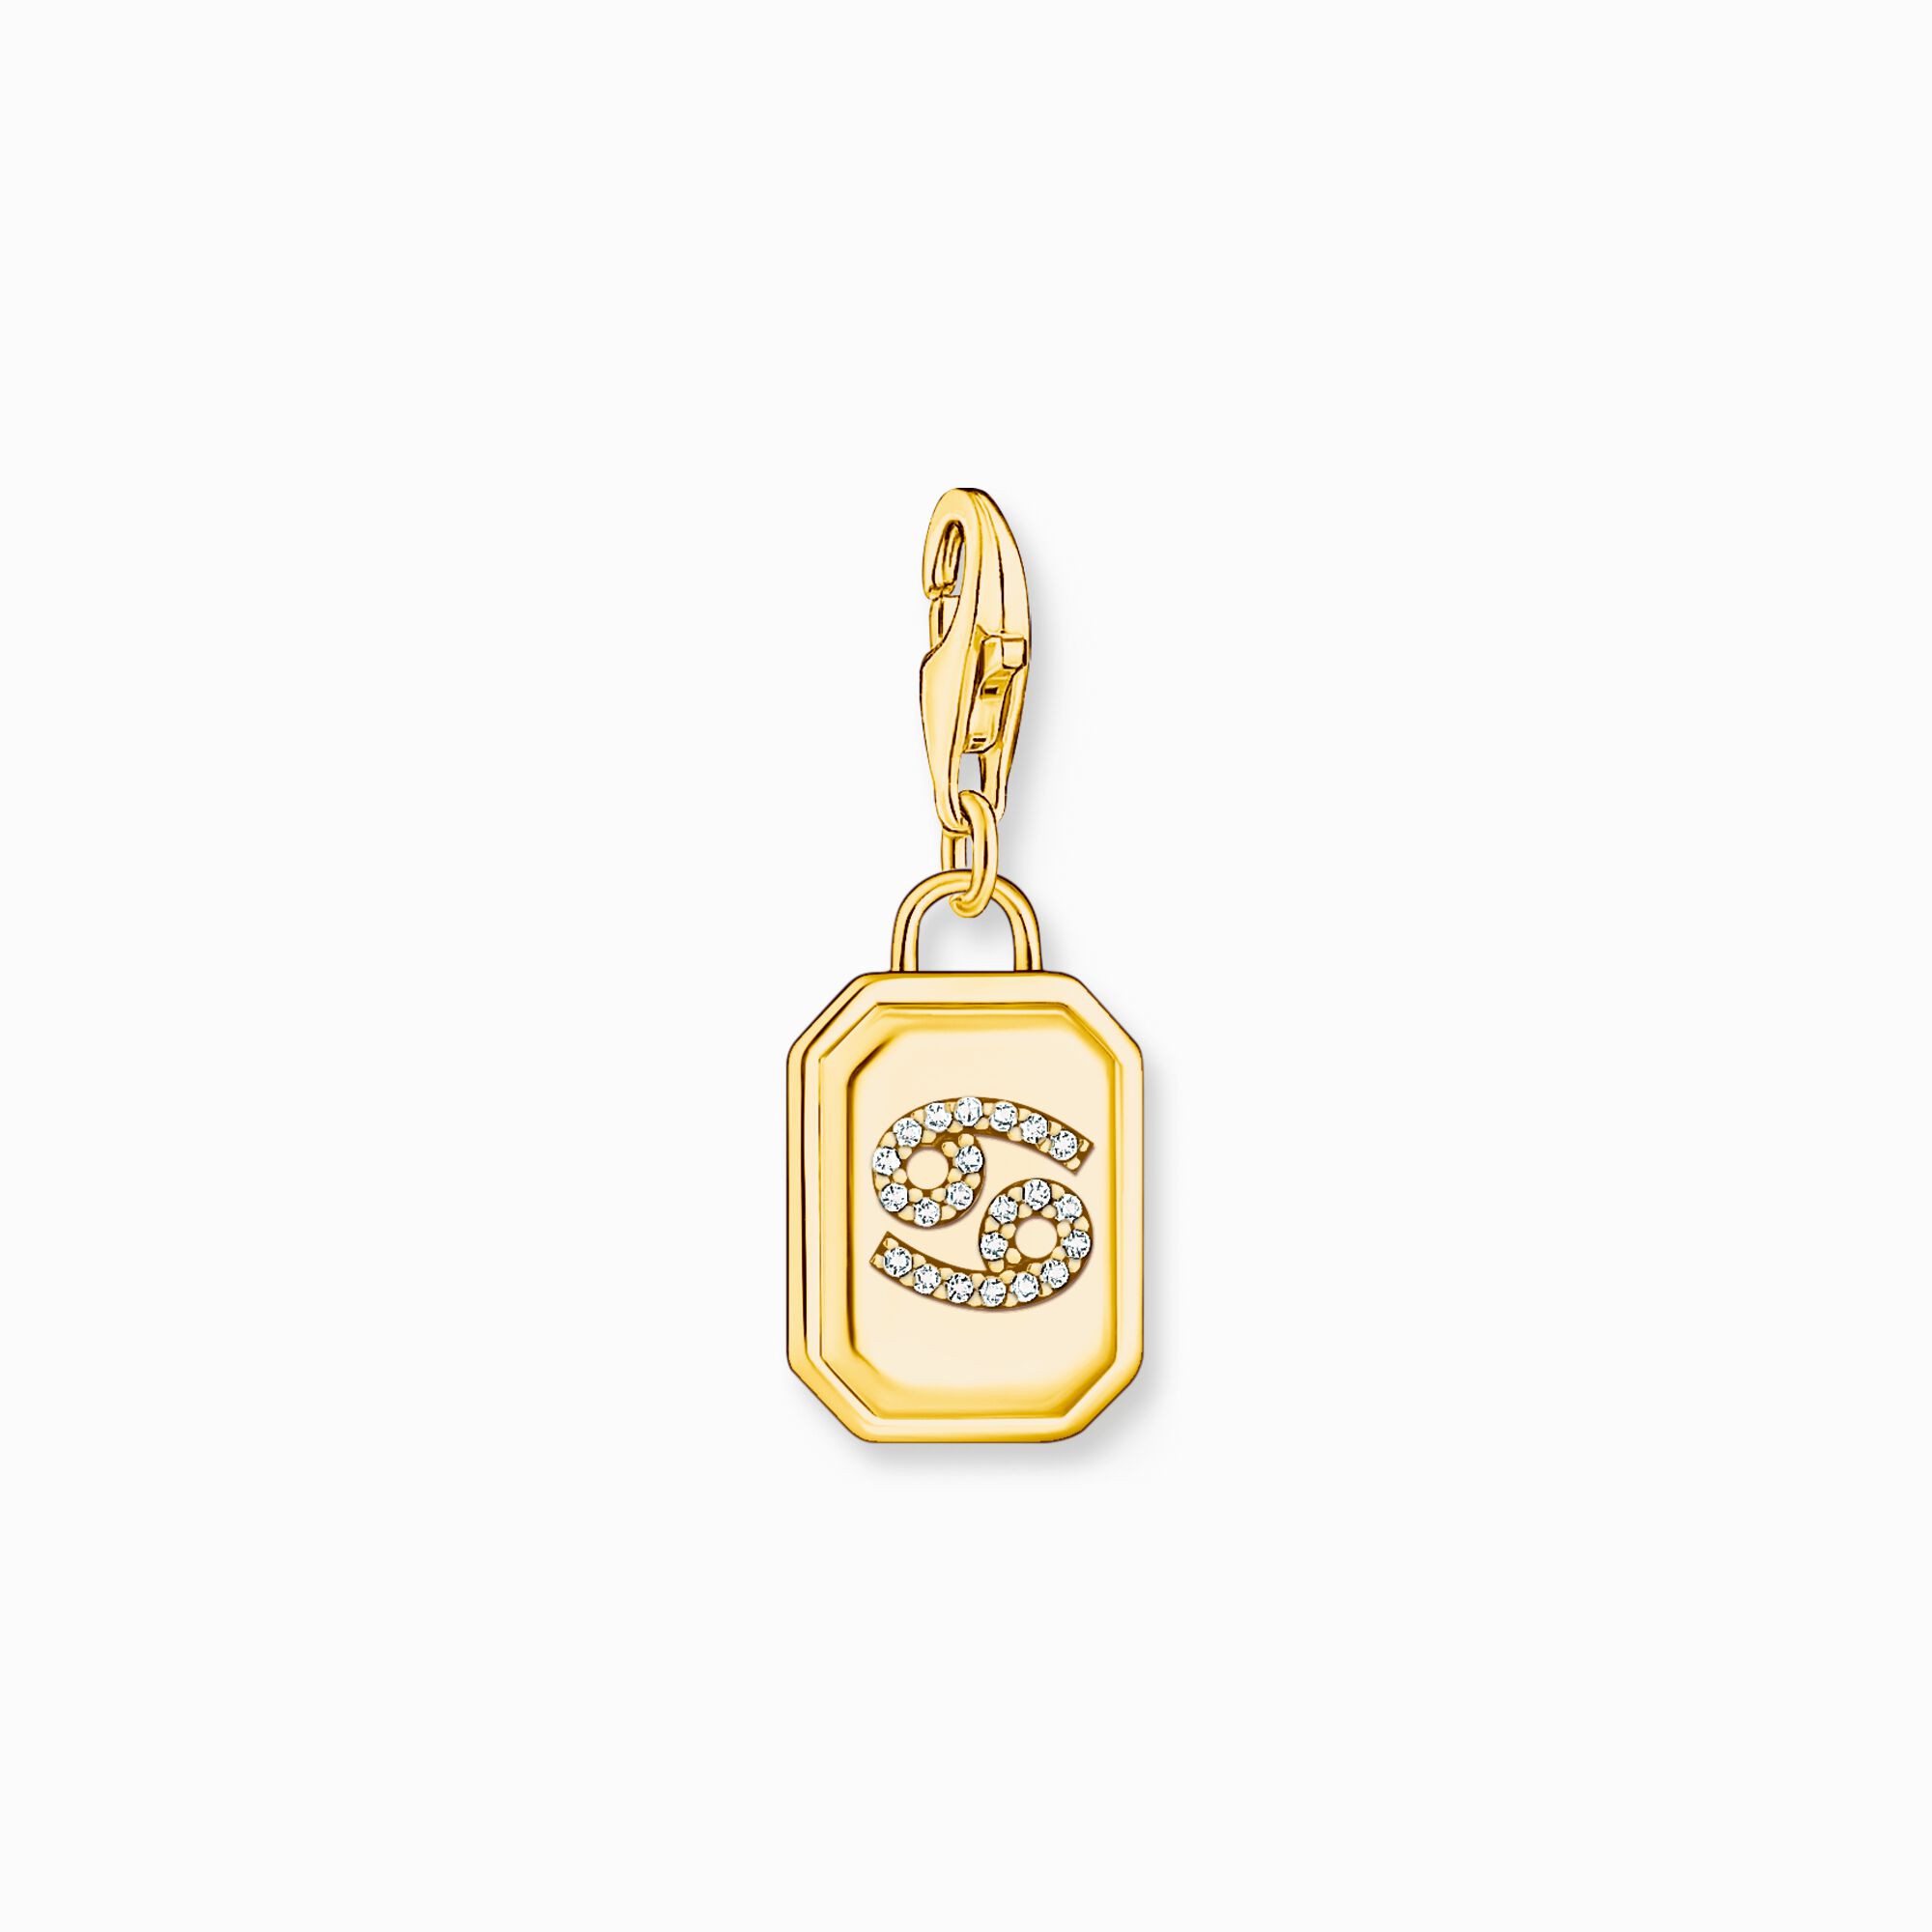 Gold-plated charm pendant zodiac sign Cancer with zirconia from the Charm Club collection in the THOMAS SABO online store